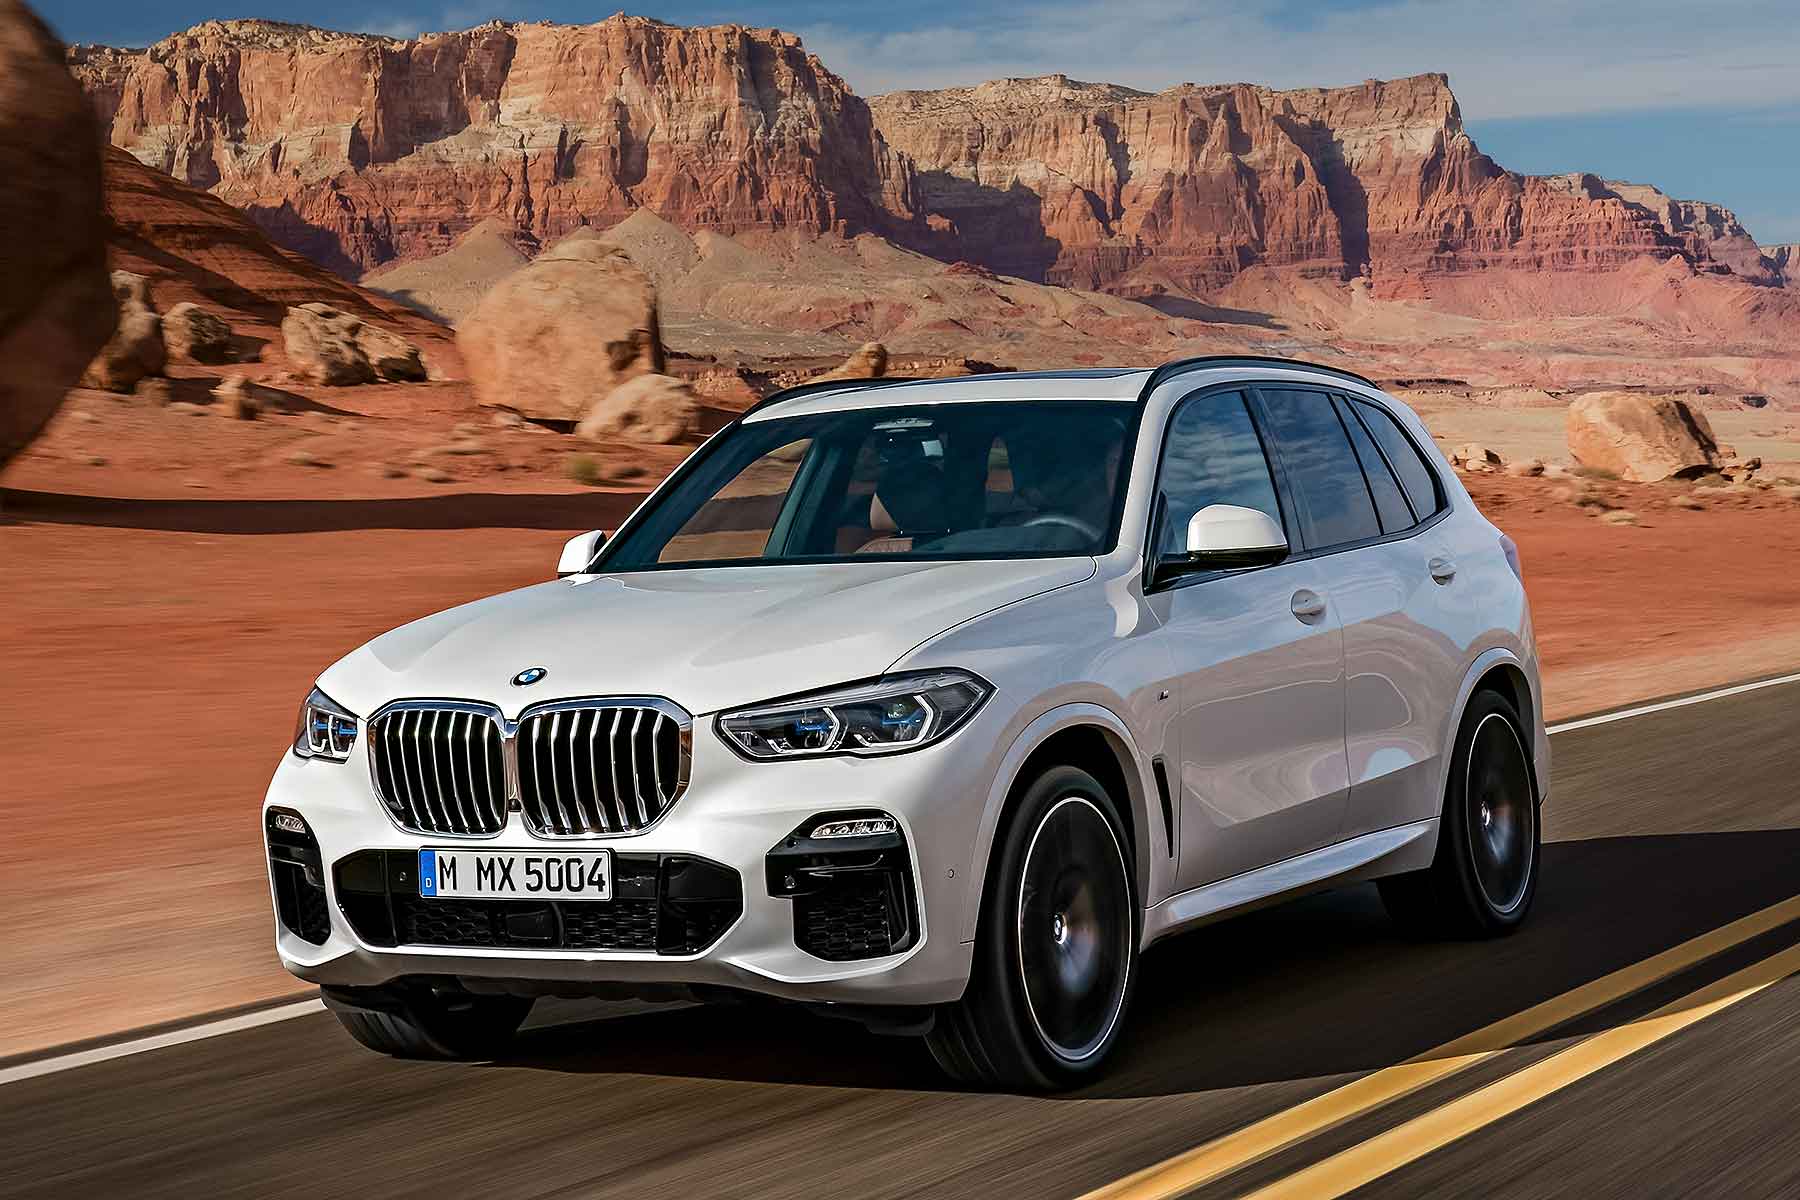 New BMW X5 SUV goes large for 2018 - Motoring Research